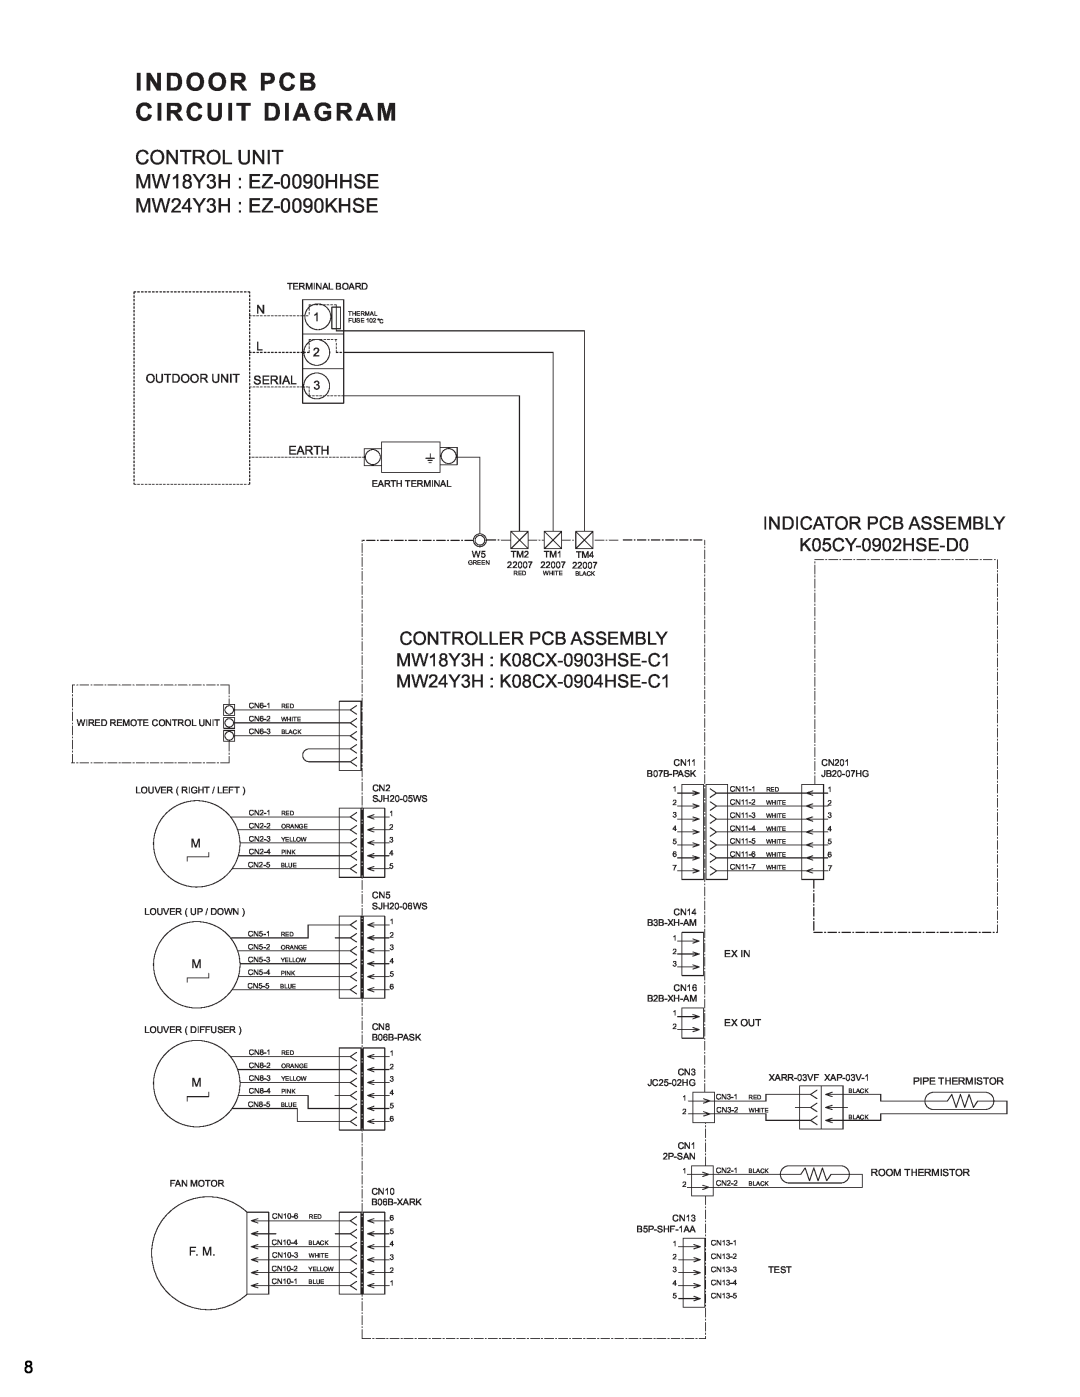 Friedrich MW18Y3H, MR18Y3H Indoor Pcb Circuit Diagram, INDICATOR PCB ASSEMBLY K05CY-0902HSE-D0, Controller Pcb Assembly 